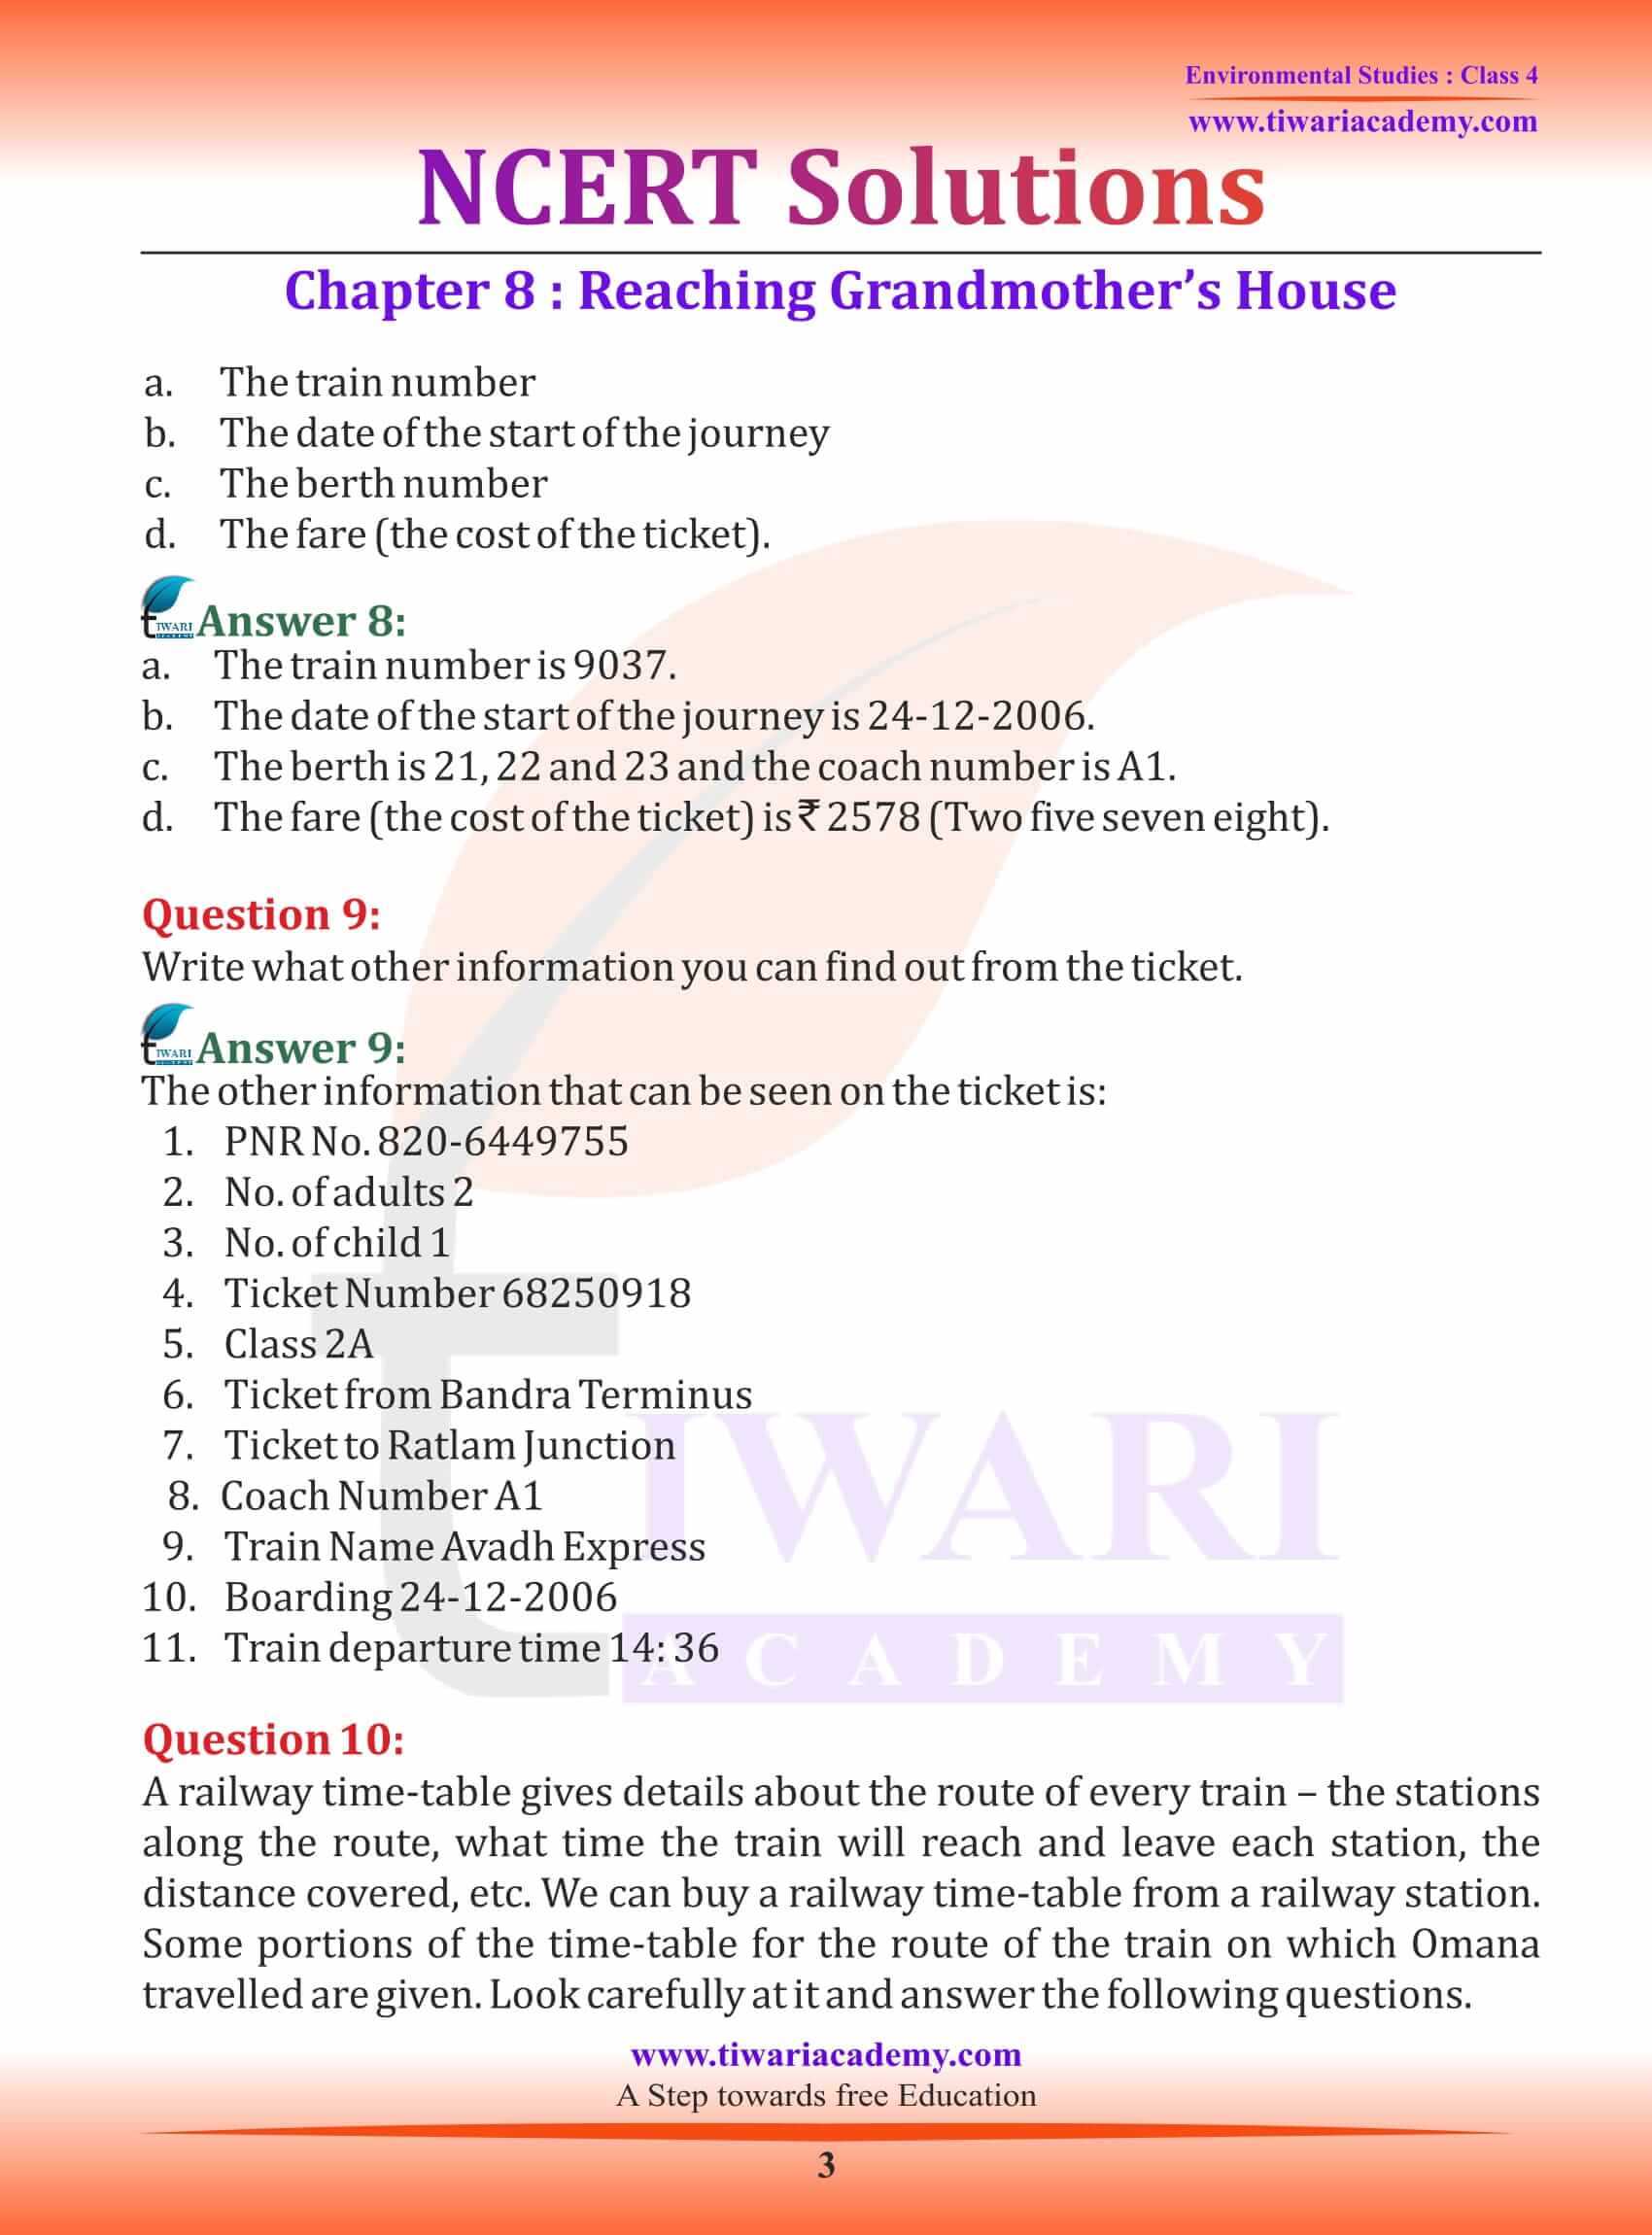 NCERT Solutions for Class 4 EVS Chapter 8